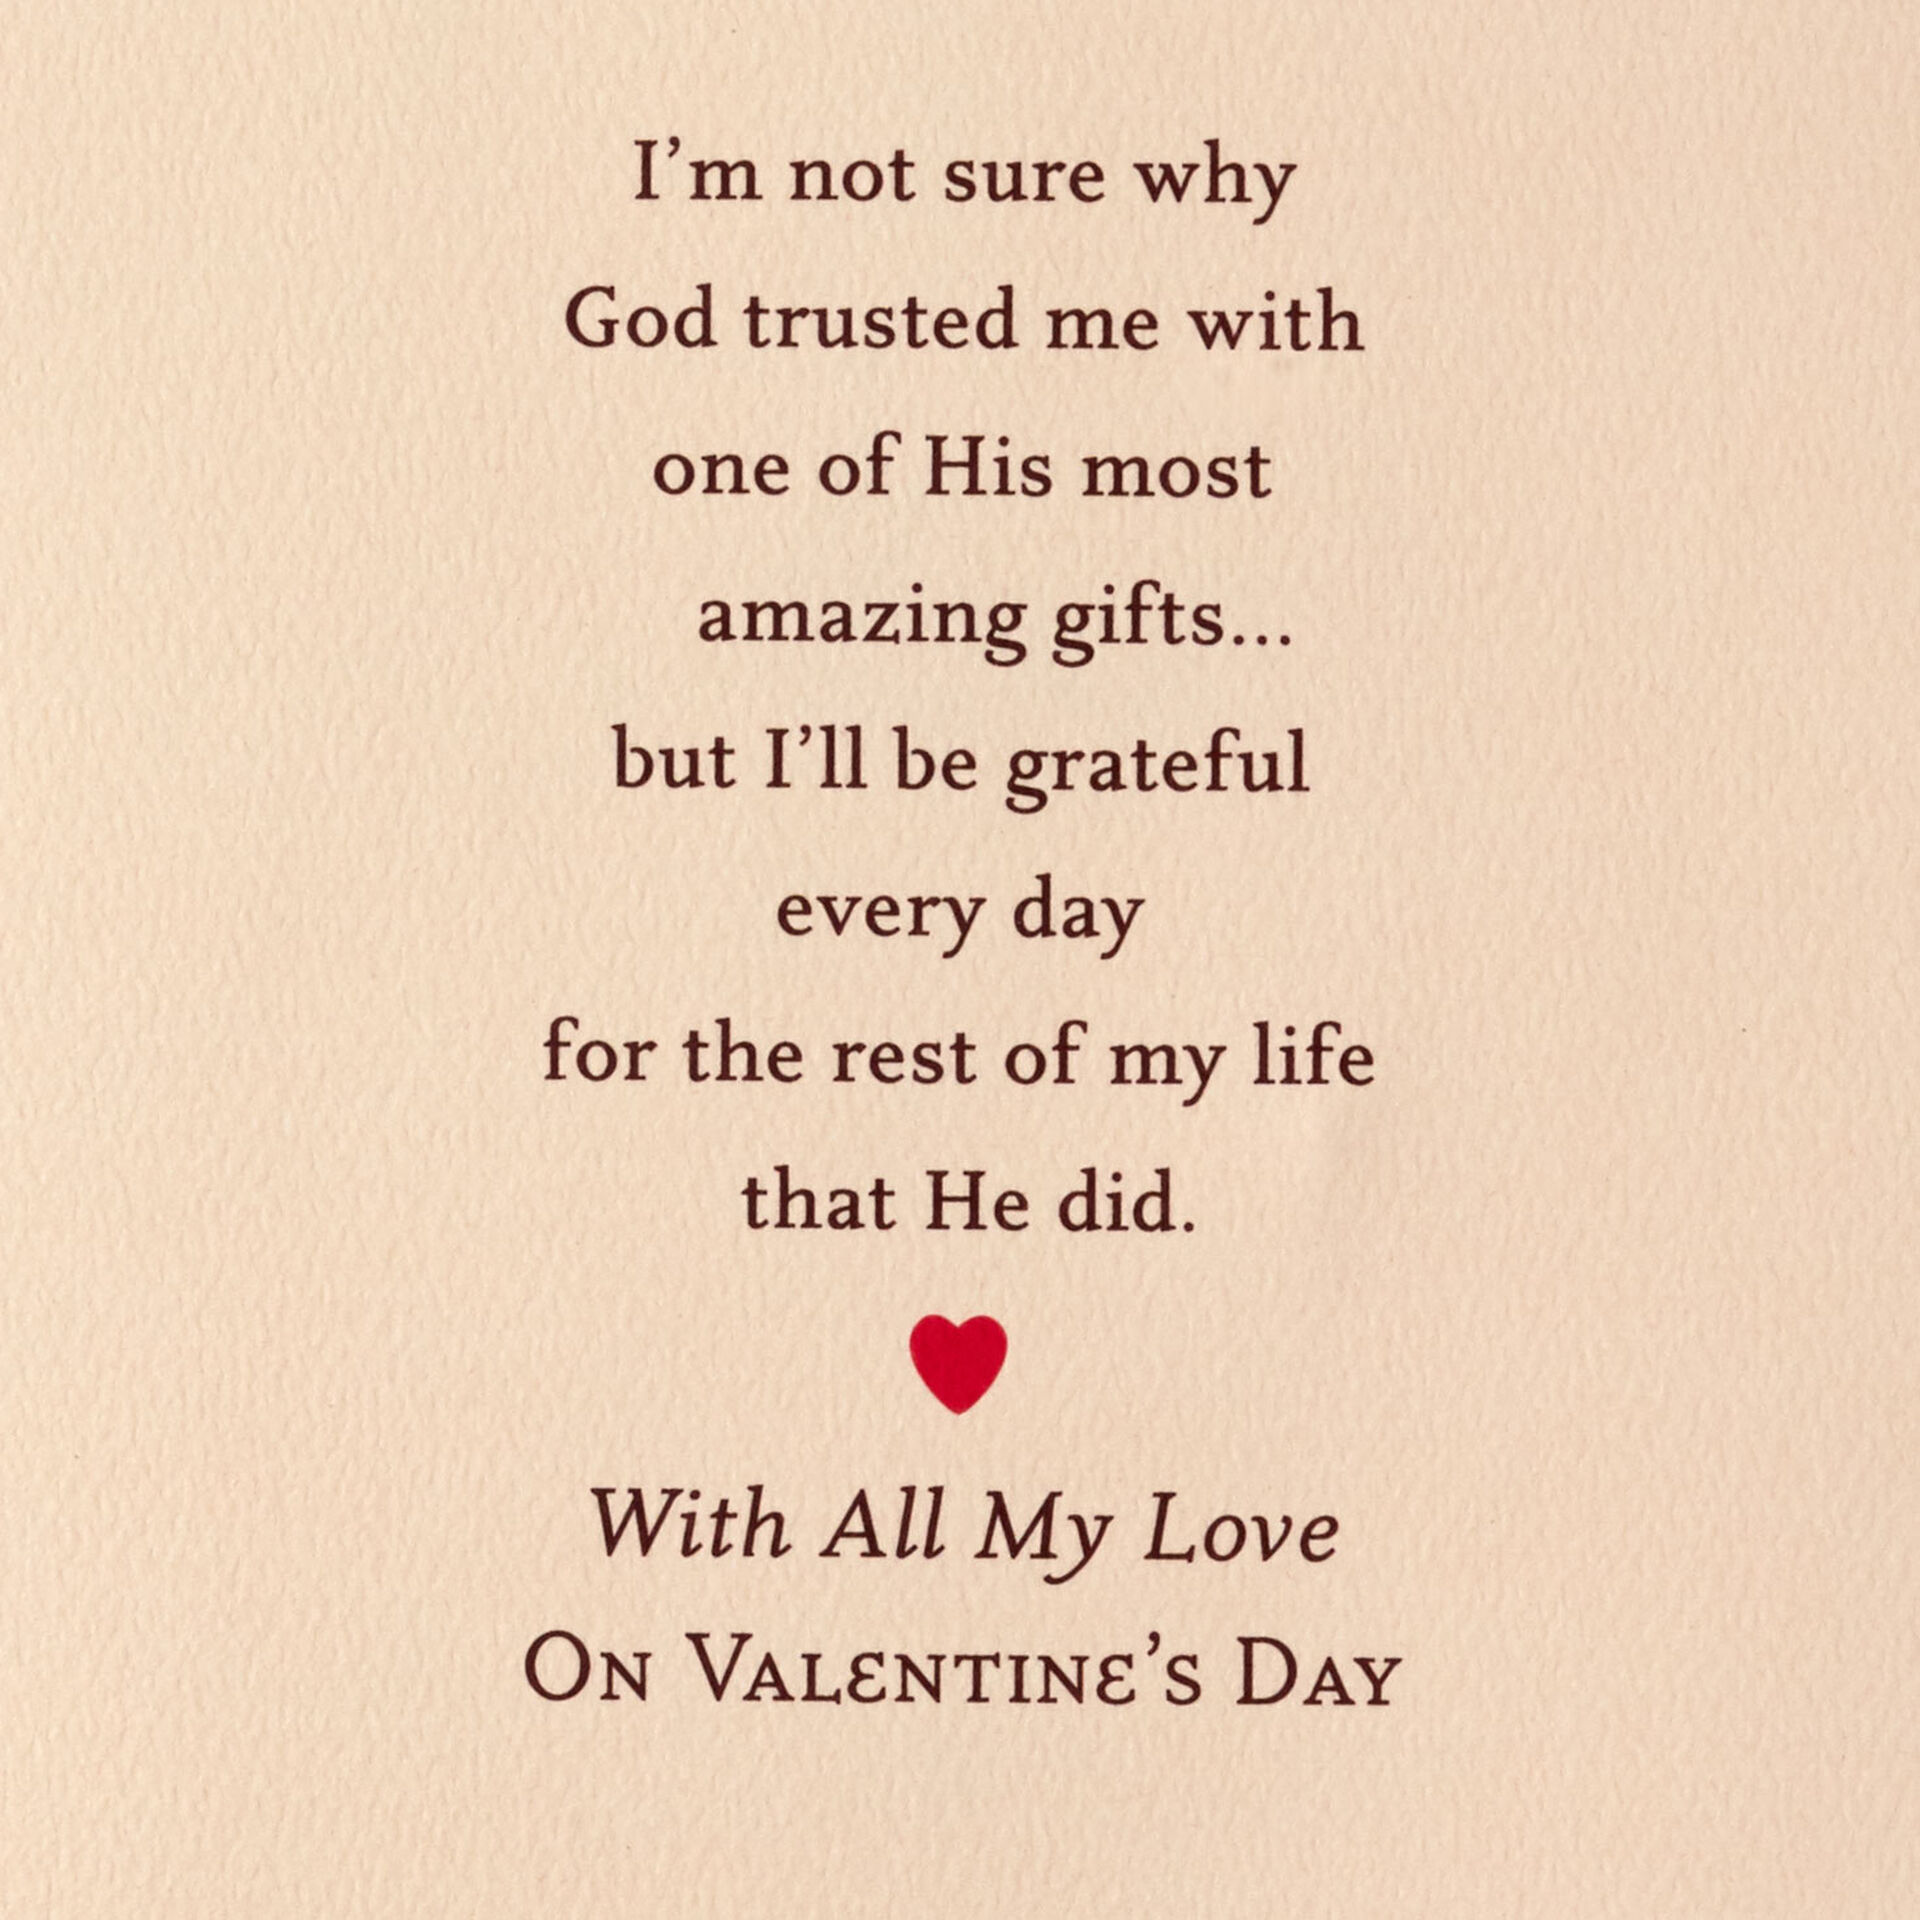 Holding-Hands-Religious-Valentines-Day-Card-for-Wife_659VCE9027_02